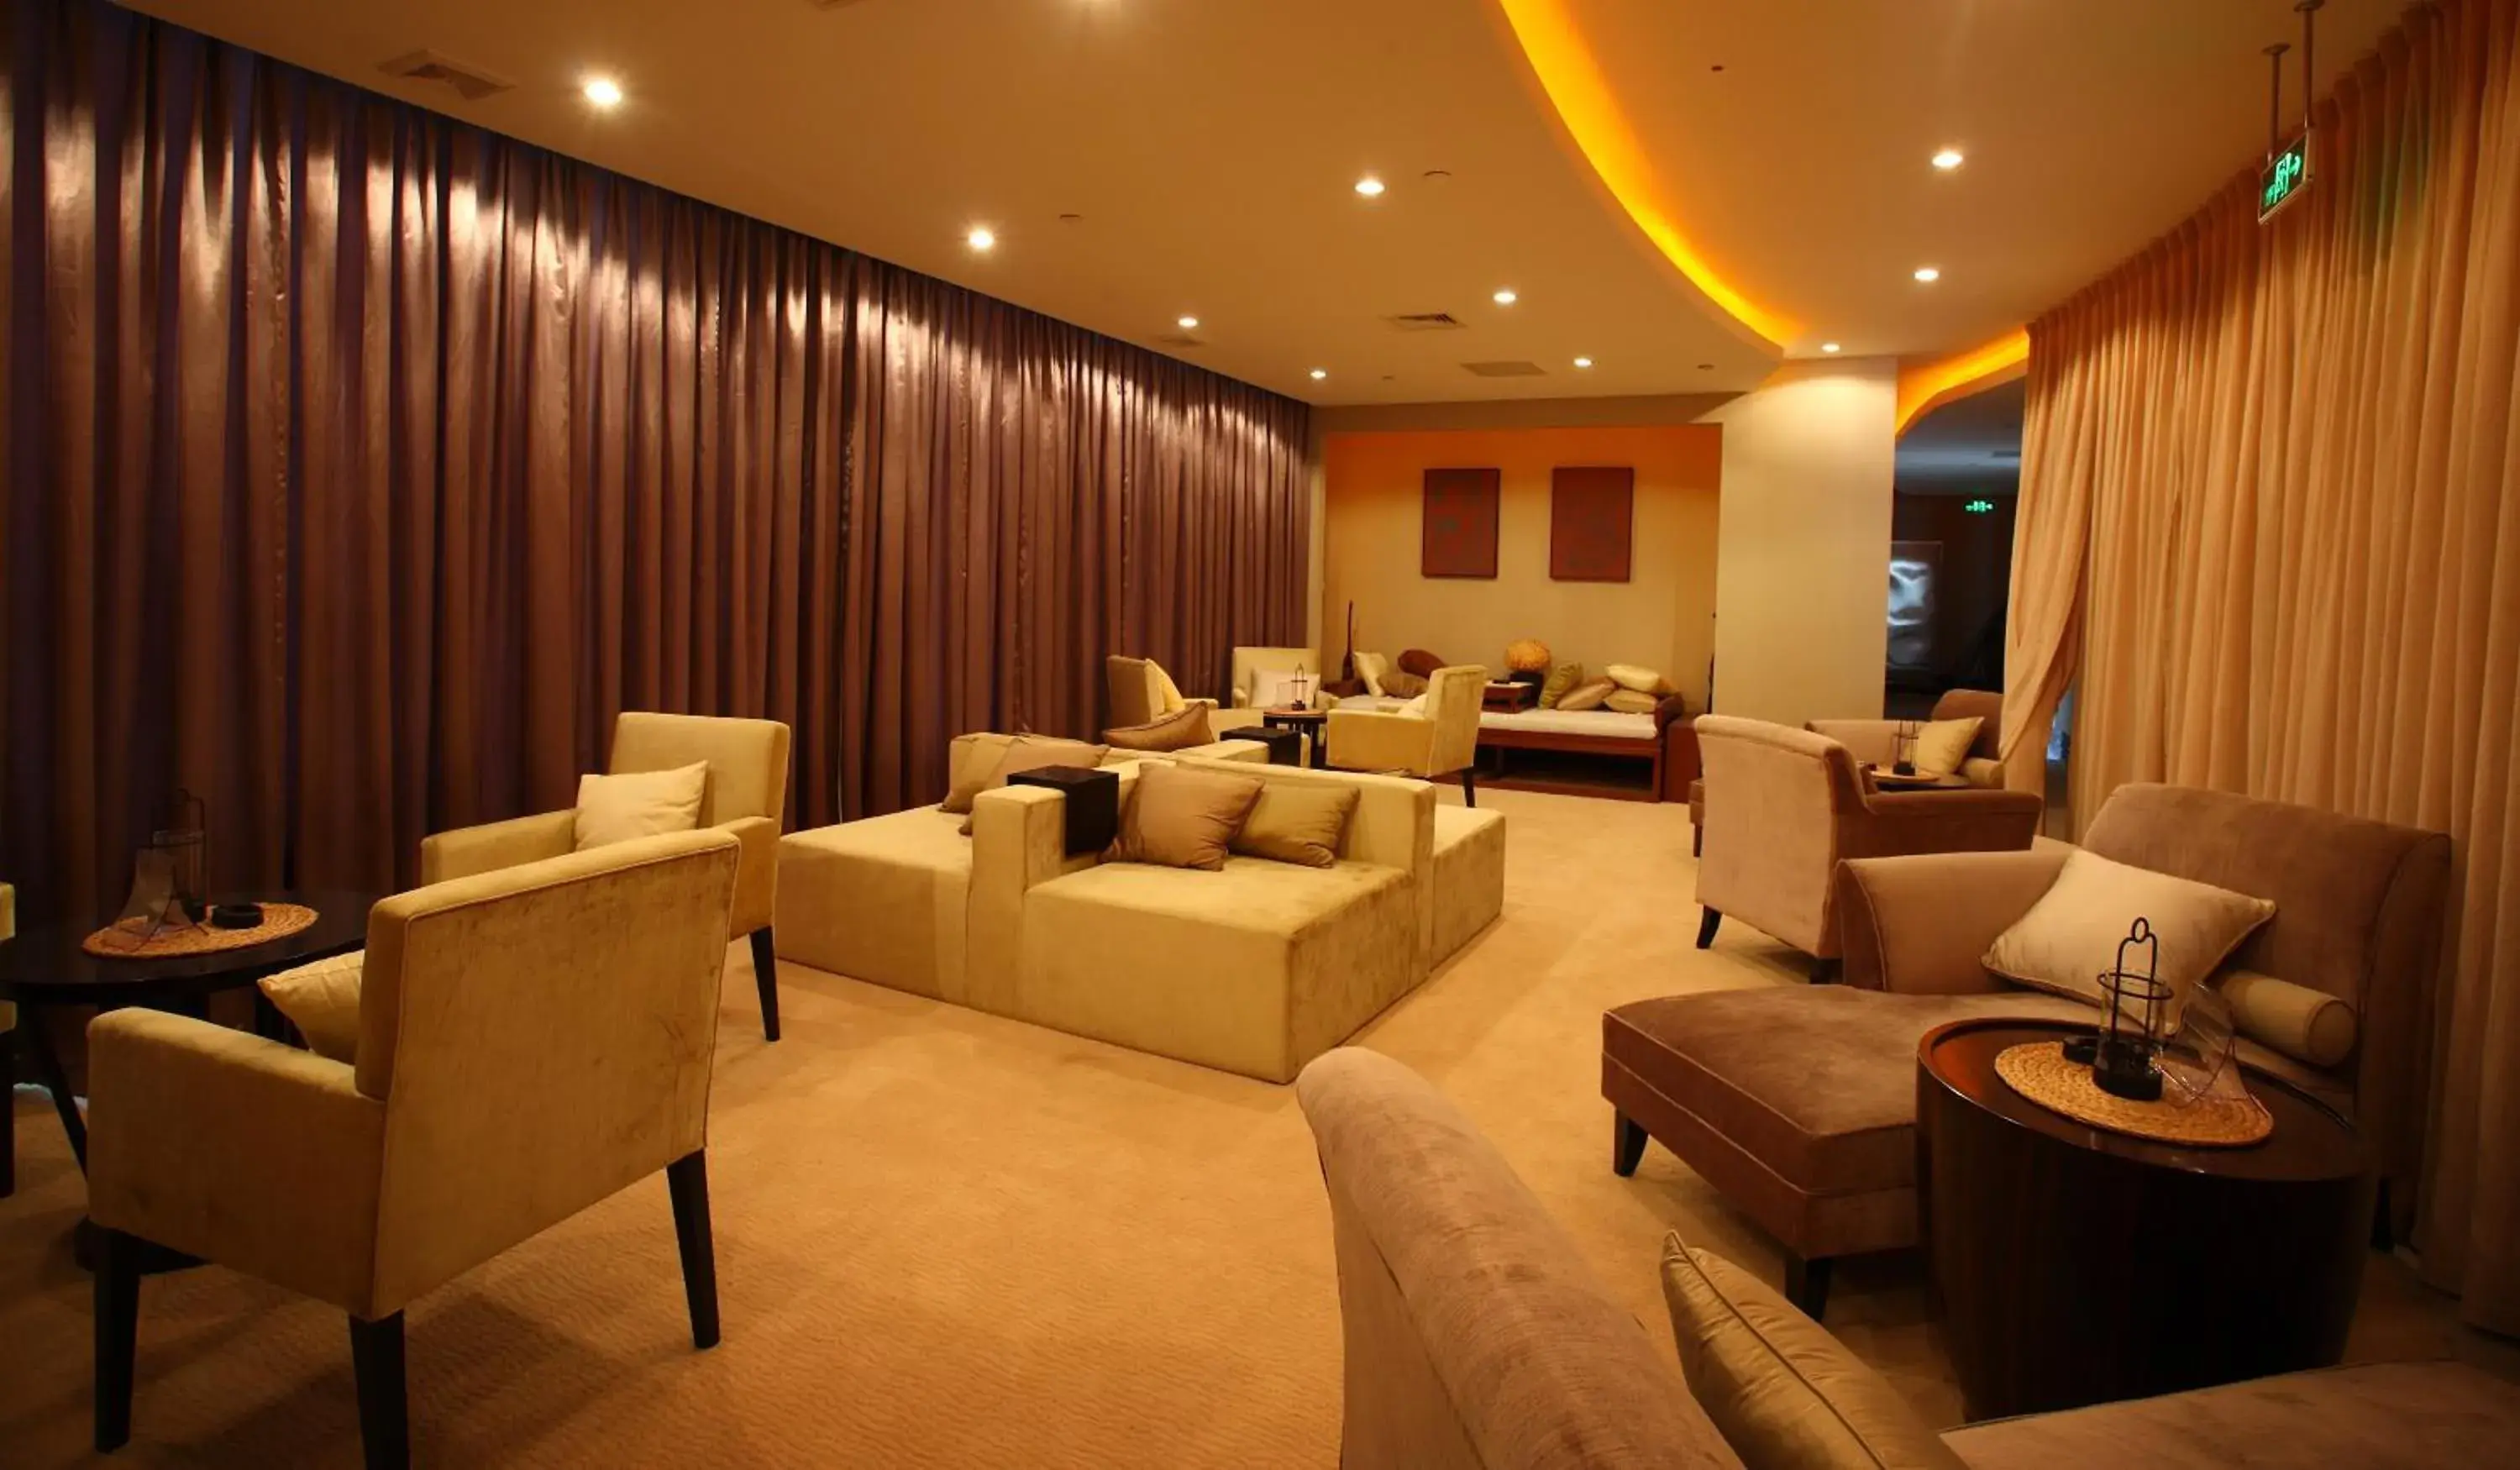 Other, Seating Area in Wenjin Hotel, Beijing